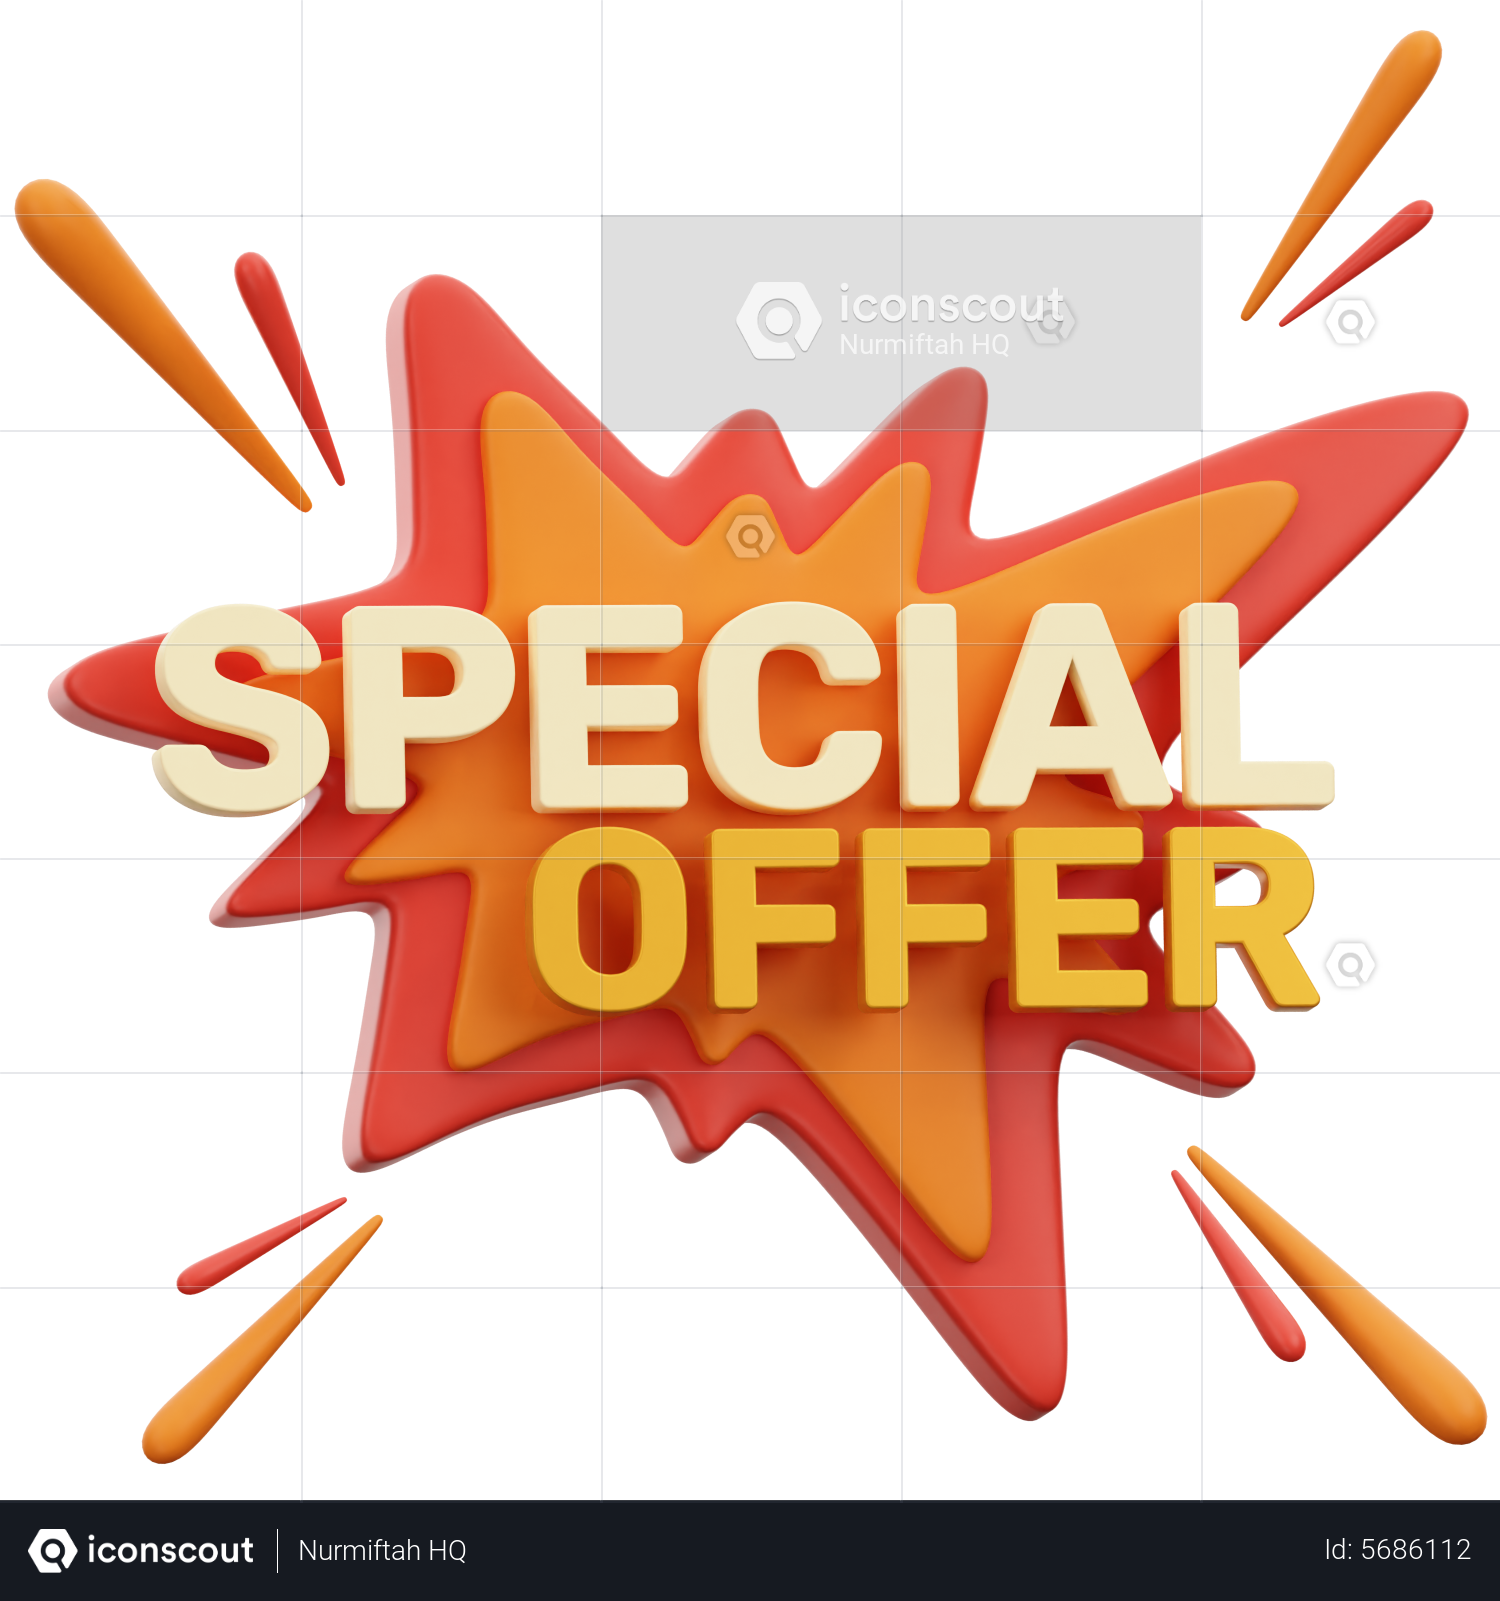 exclusive offer logo